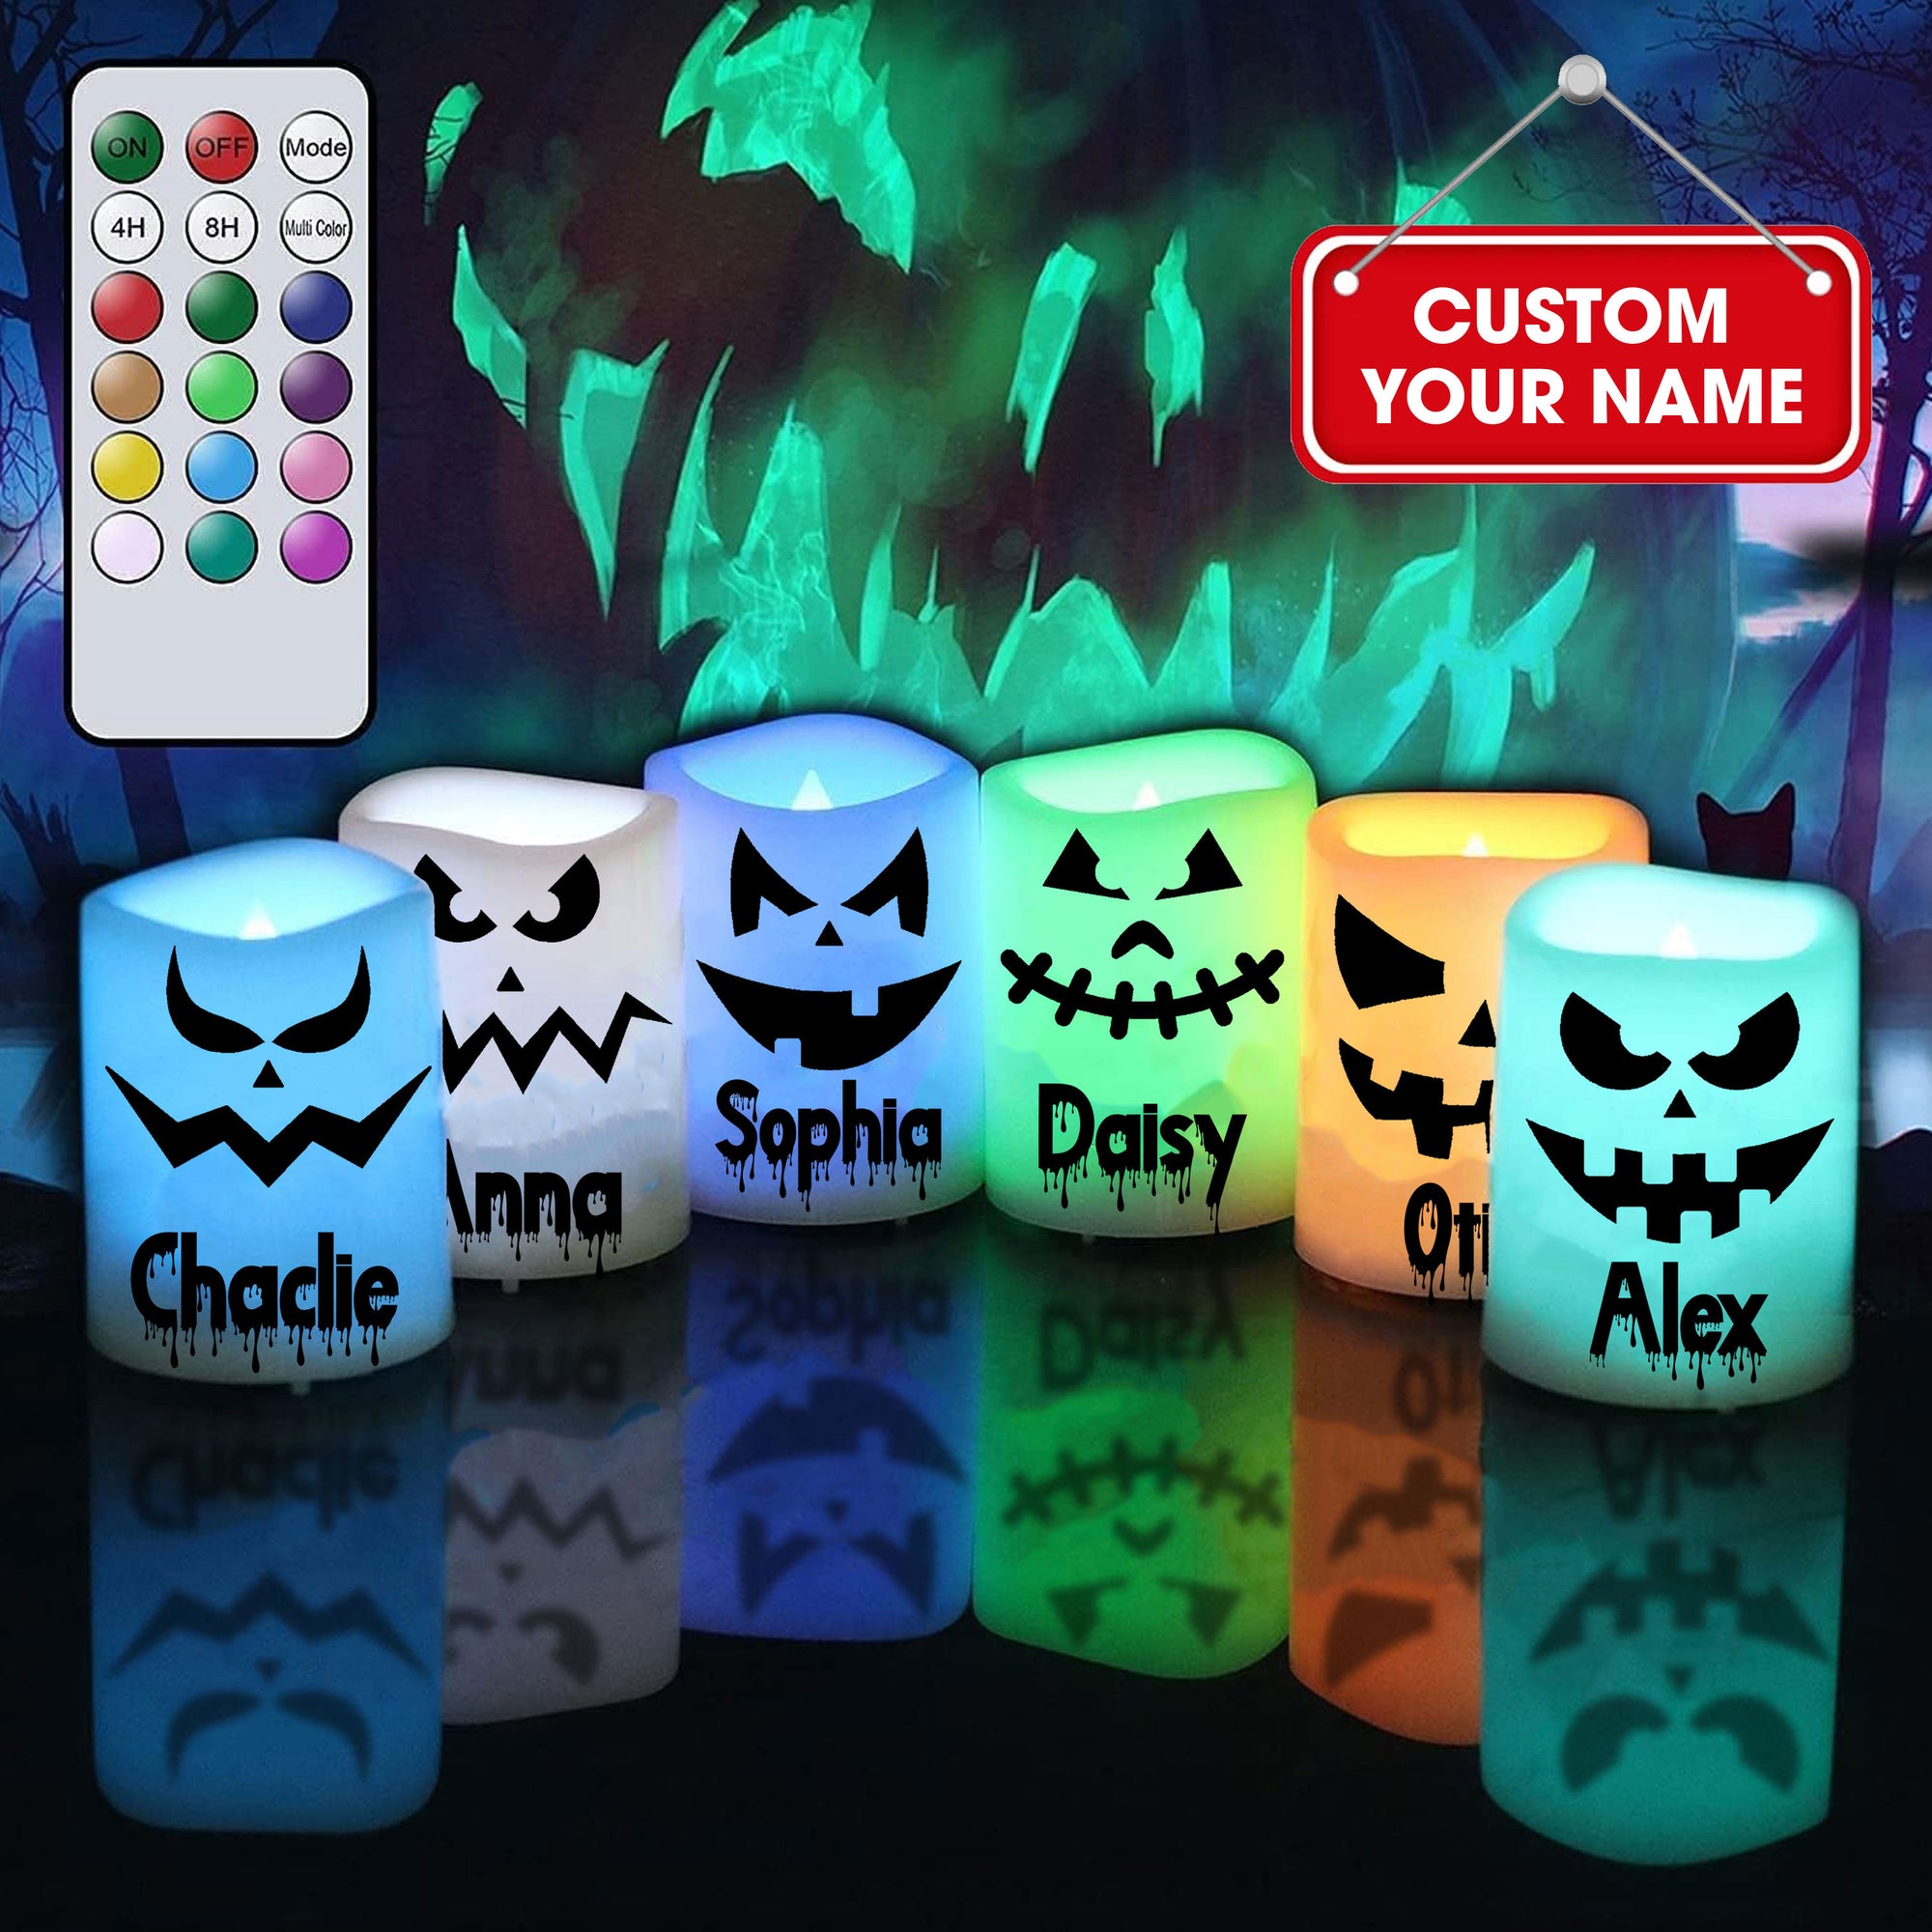 Personalized Floating LED - Candles Color Changing With Remote Timer, Battery Operated LED Tealight Candles for Halloween Home Decoration Gifts